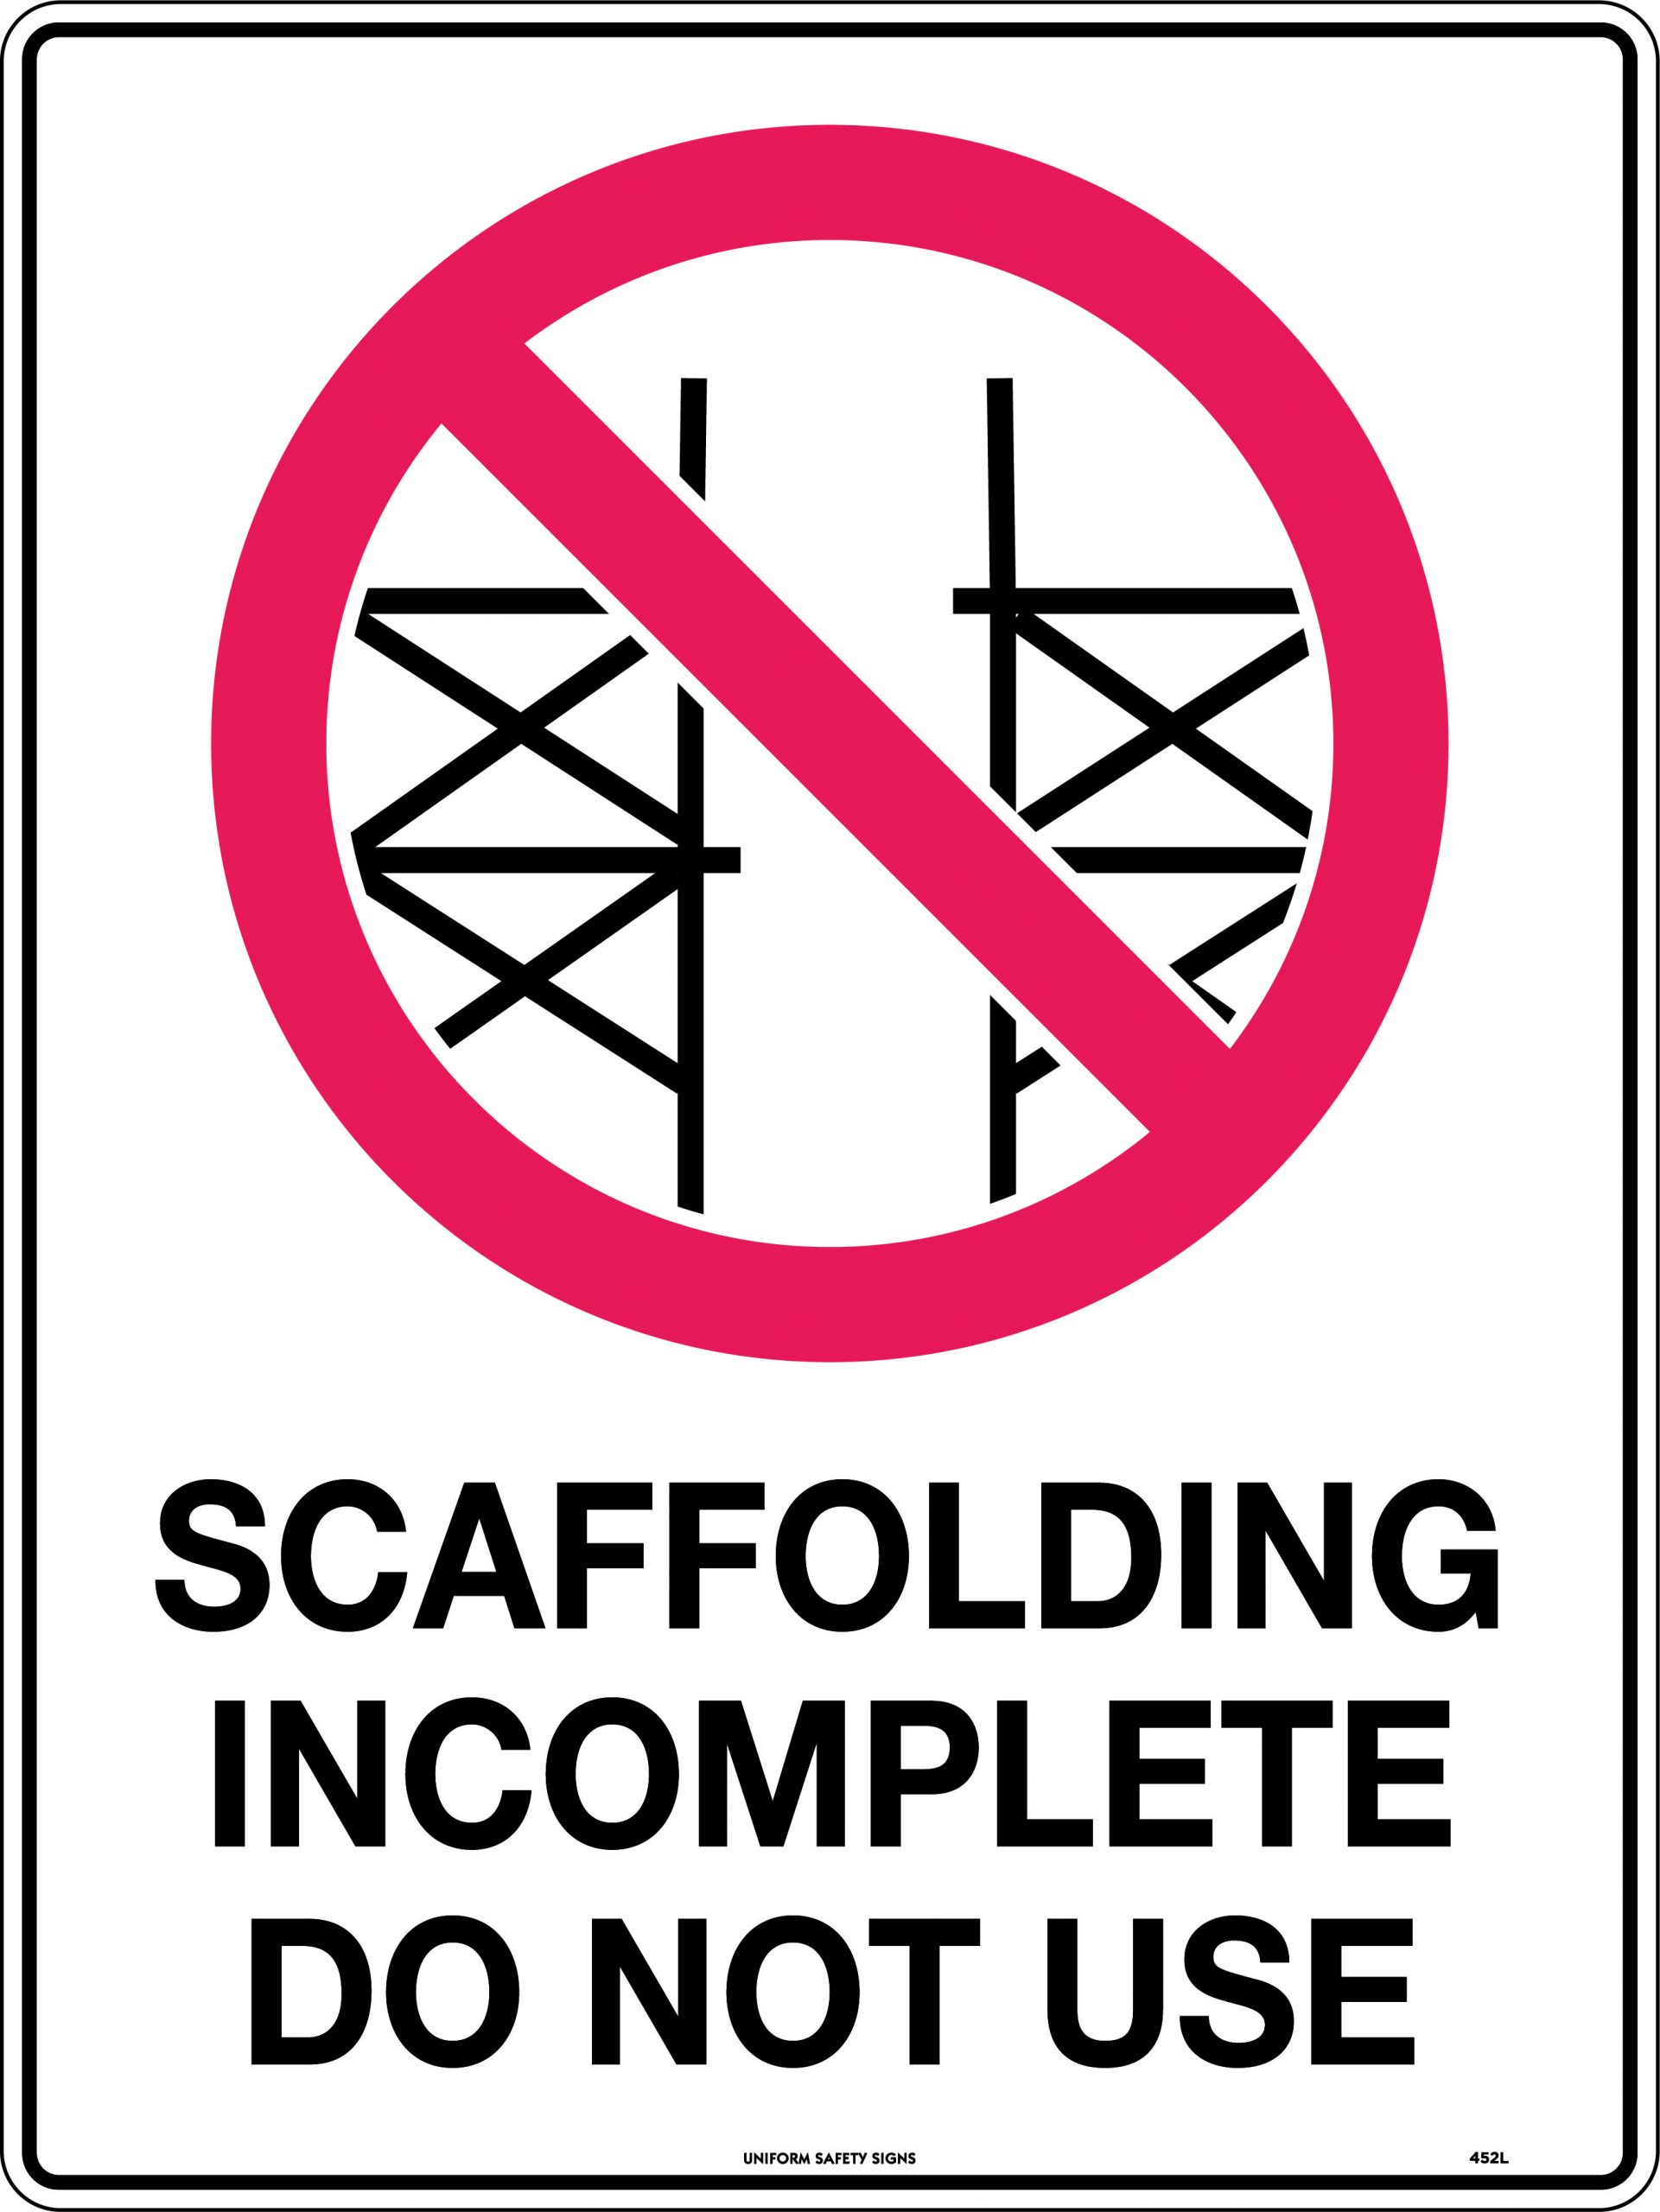 UNIFORM SAFETY 600X450MM POLY SCAFFOLDING INCOMPLETE DO NOT USE